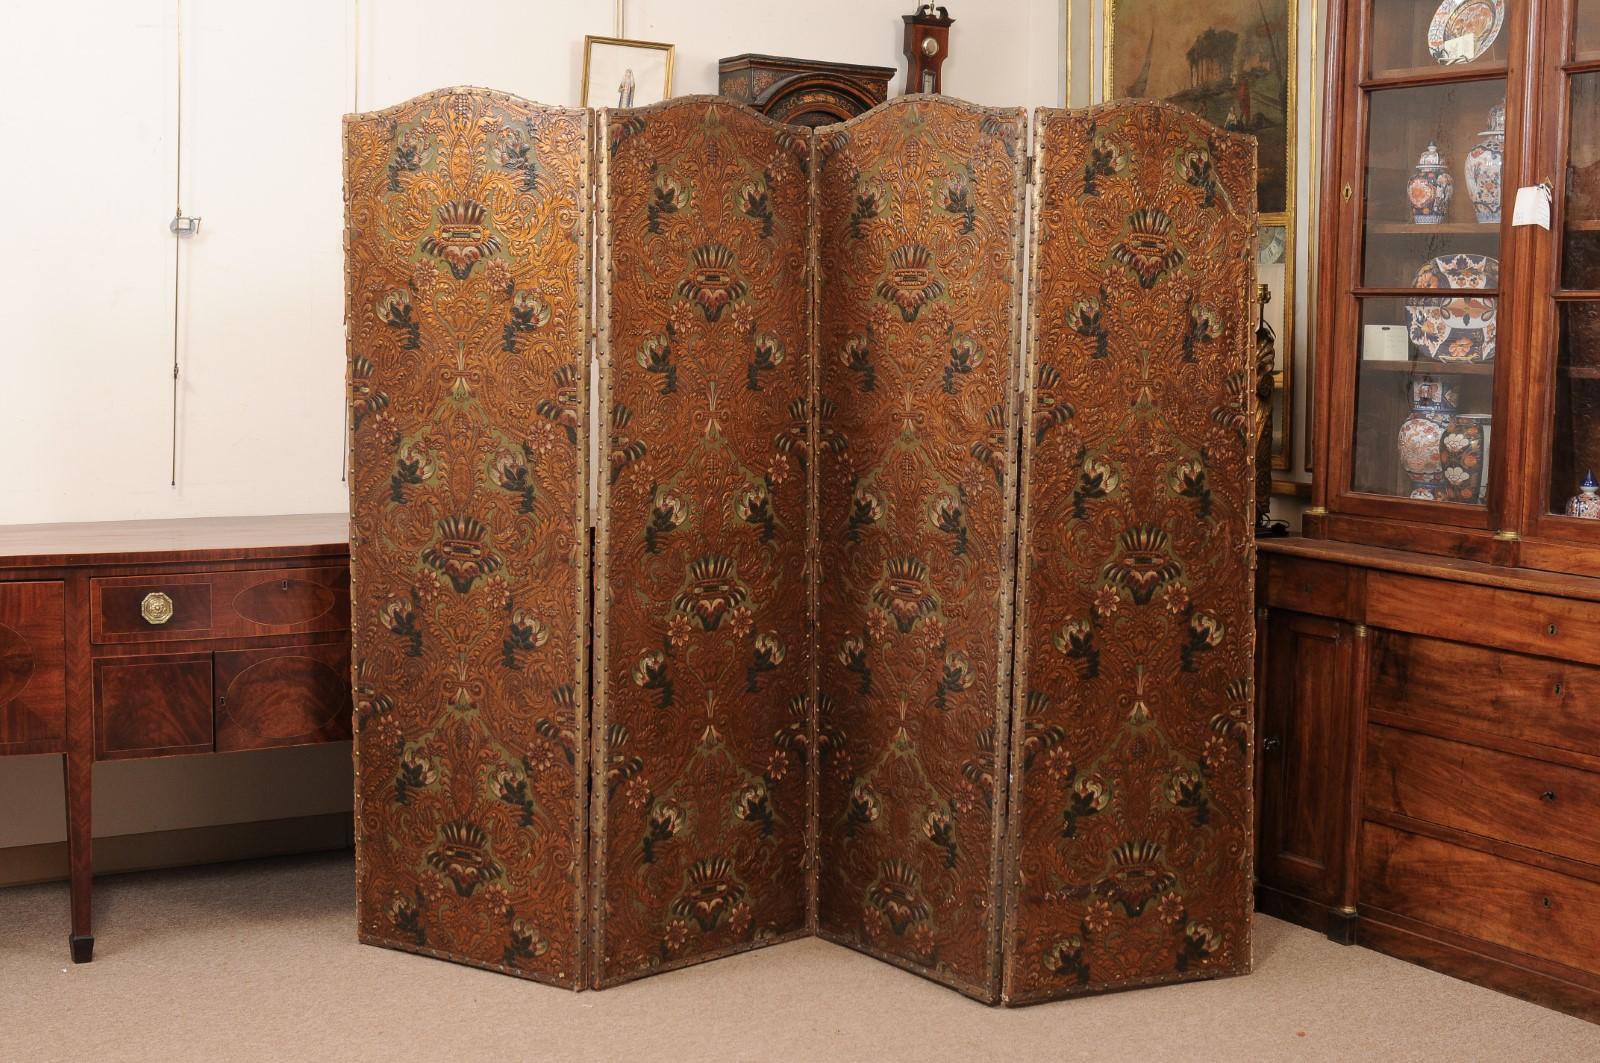  19th Century French 4 Panel Embossed & Painted Folding Screen In Fair Condition For Sale In Atlanta, GA